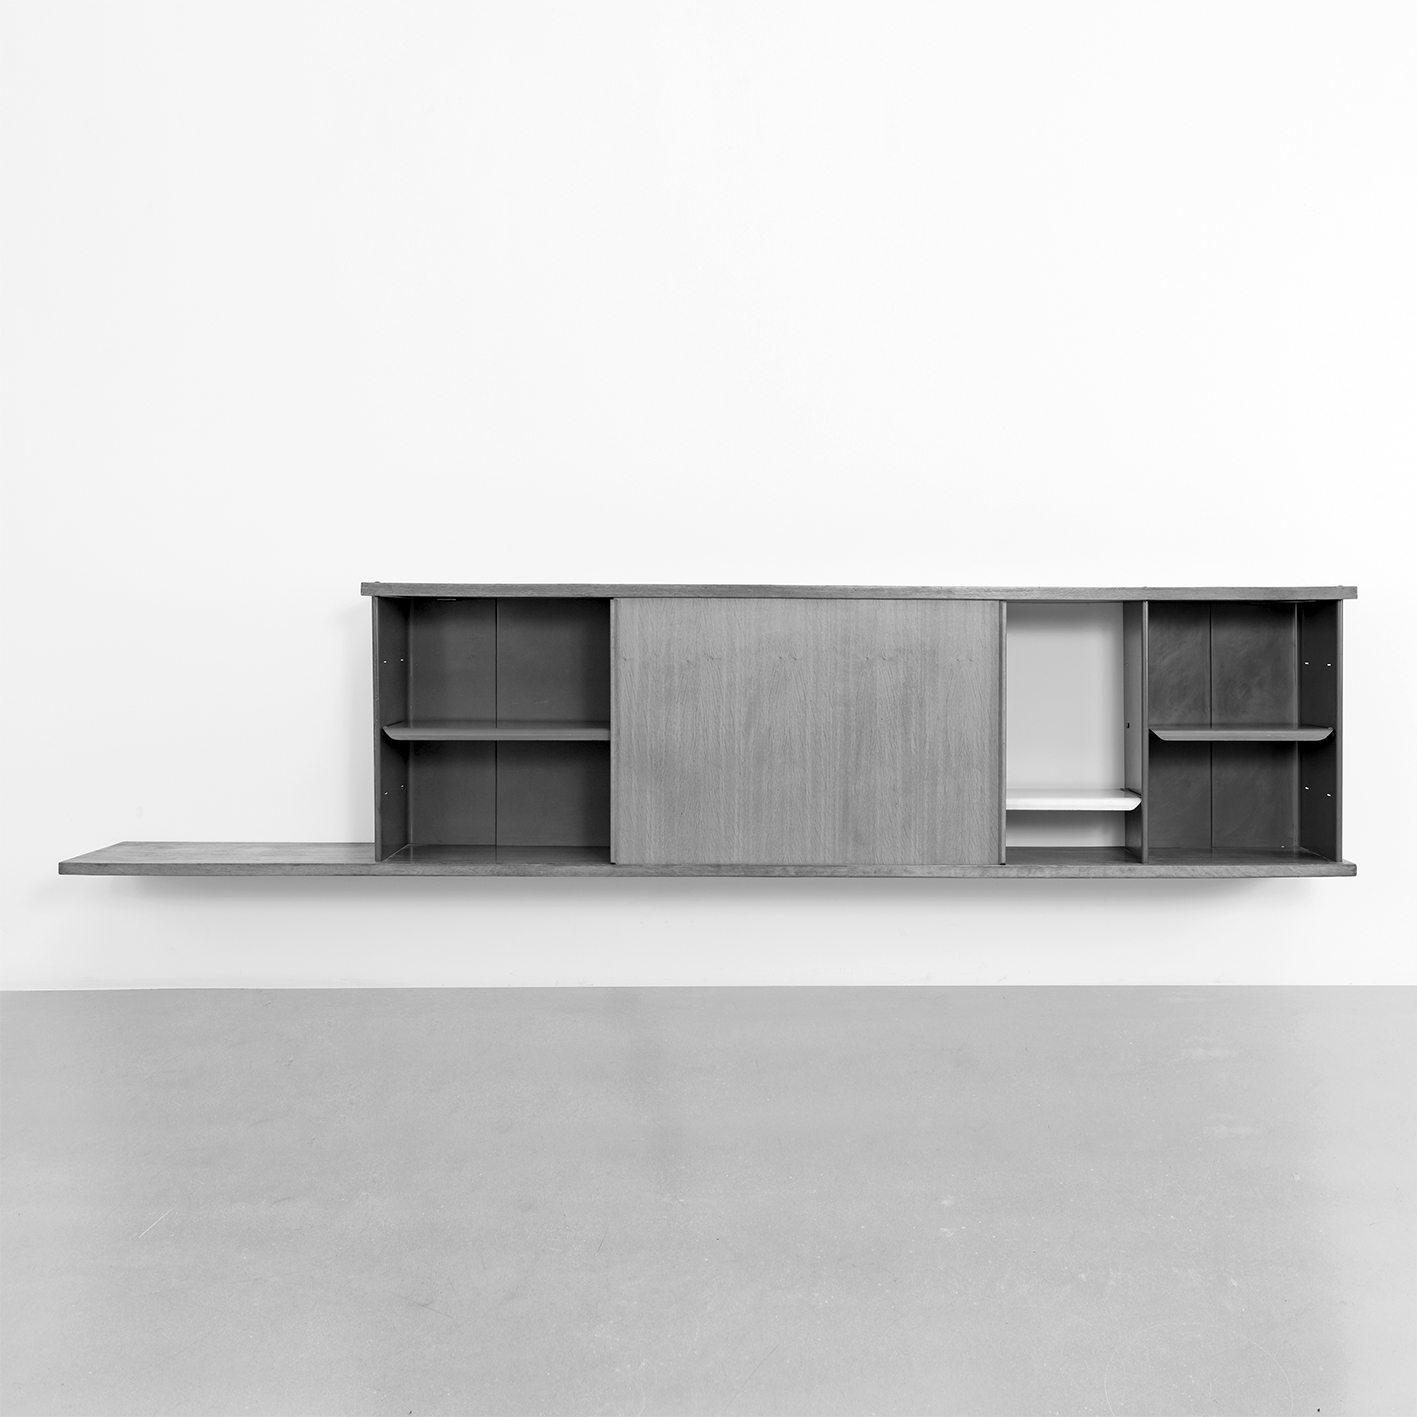 Type Antony bookcase, 1955 (adaptation of the Mexique bookcase by Charlotte Perriand). Provenance: Cité Universitaire, Antony.